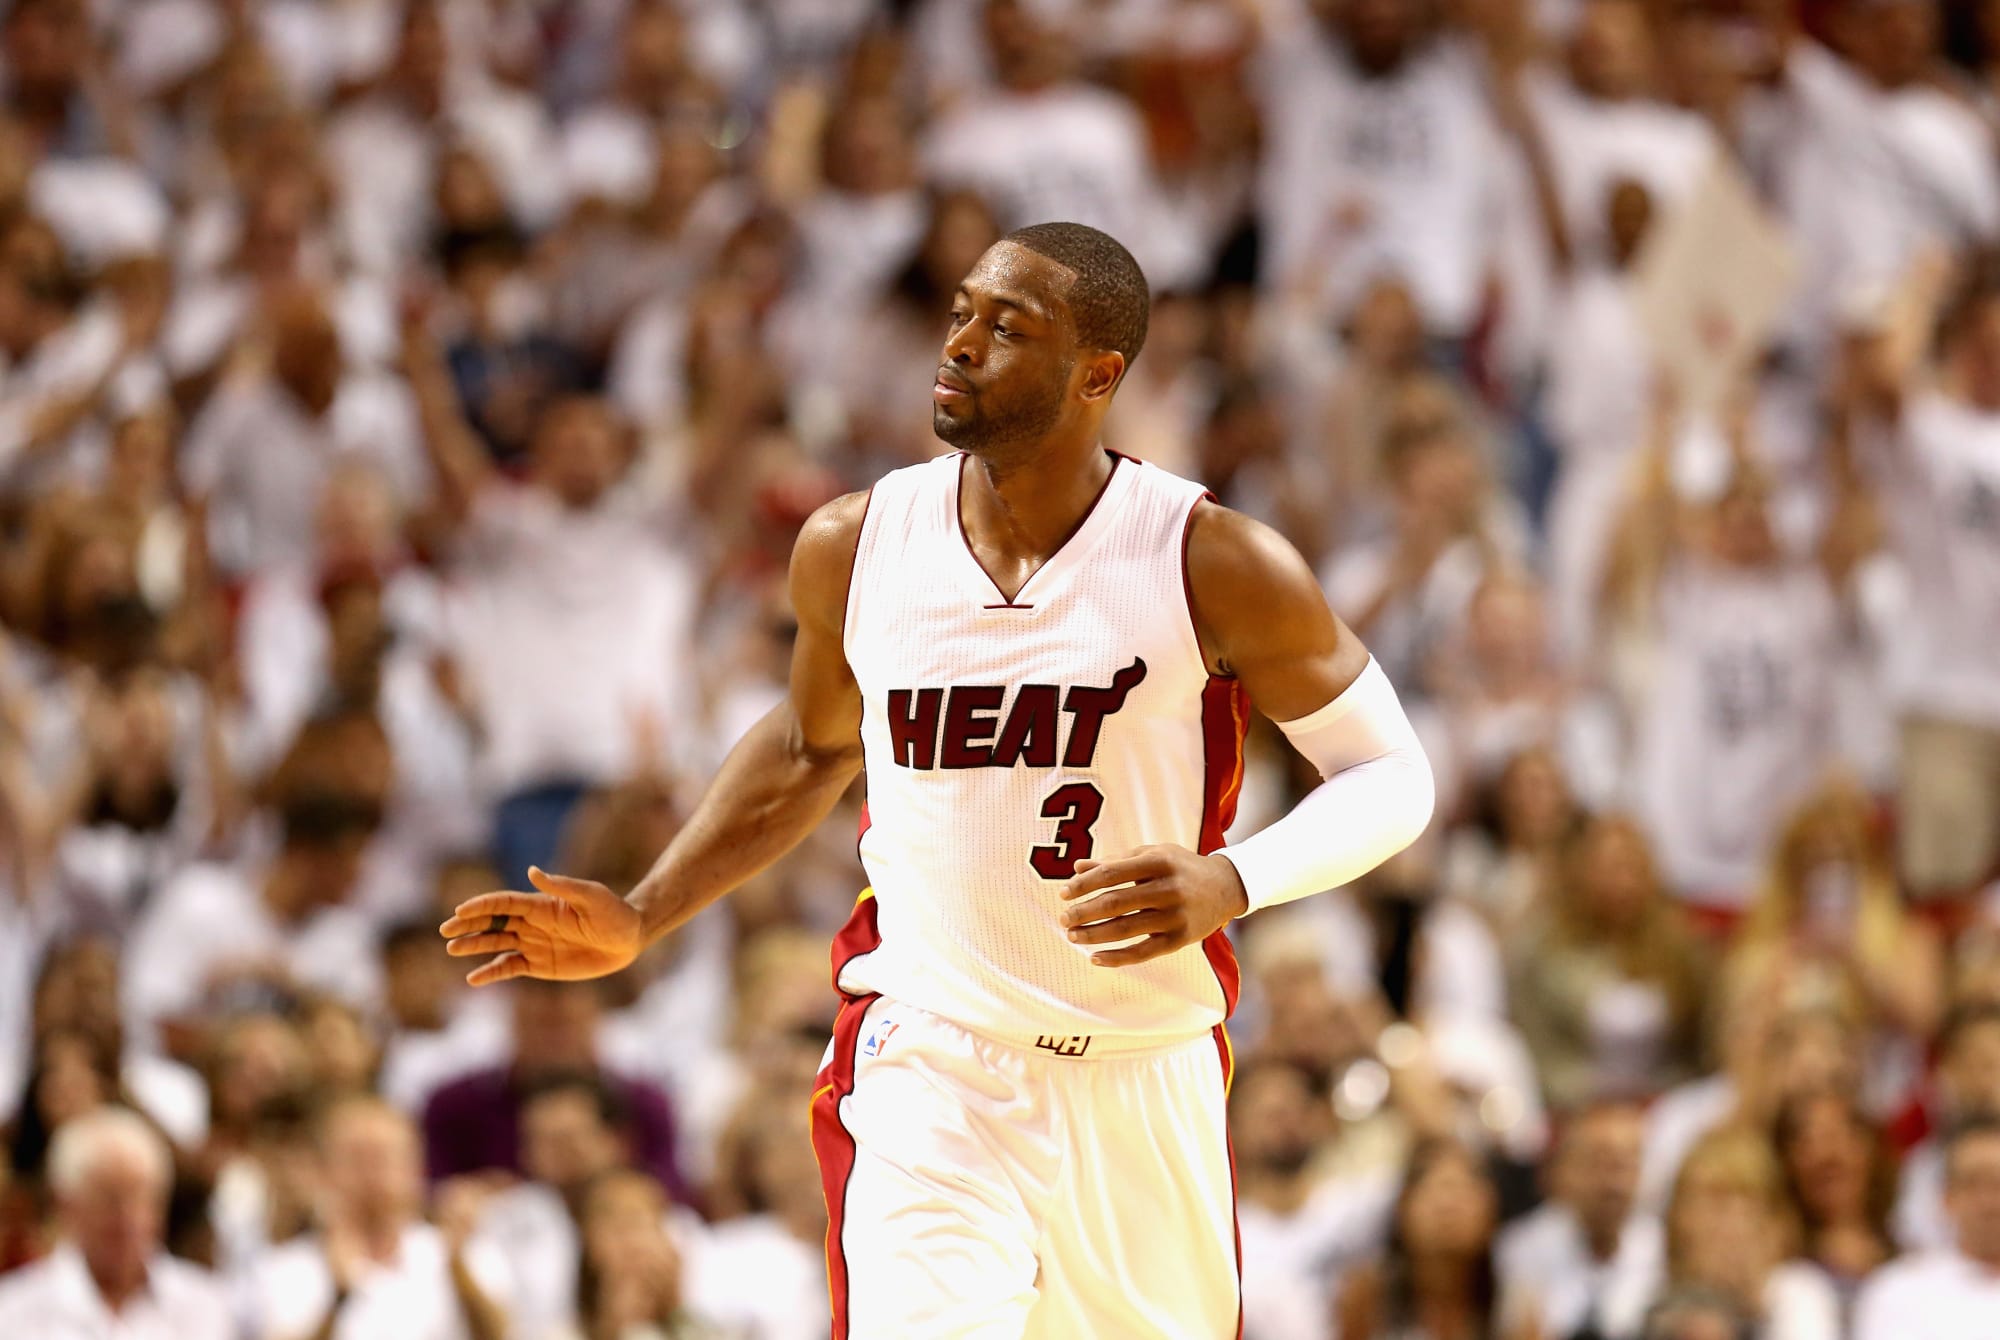 Dwyane Wade wants to retire as a member of the Miami Heat